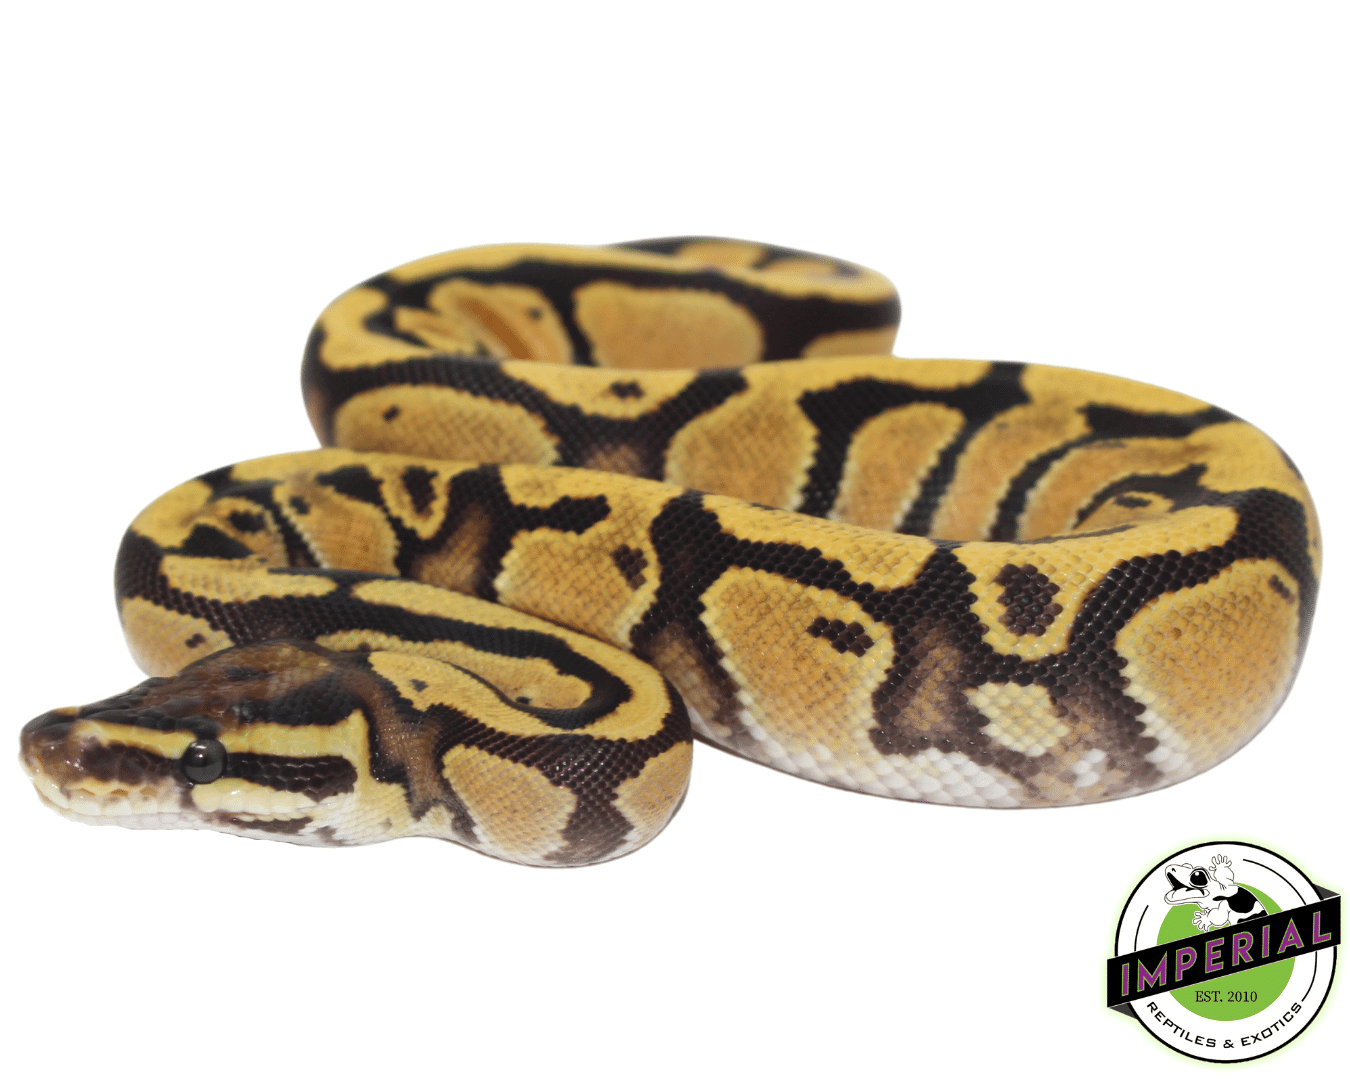 orange dream ball python for sale online at cheap prices